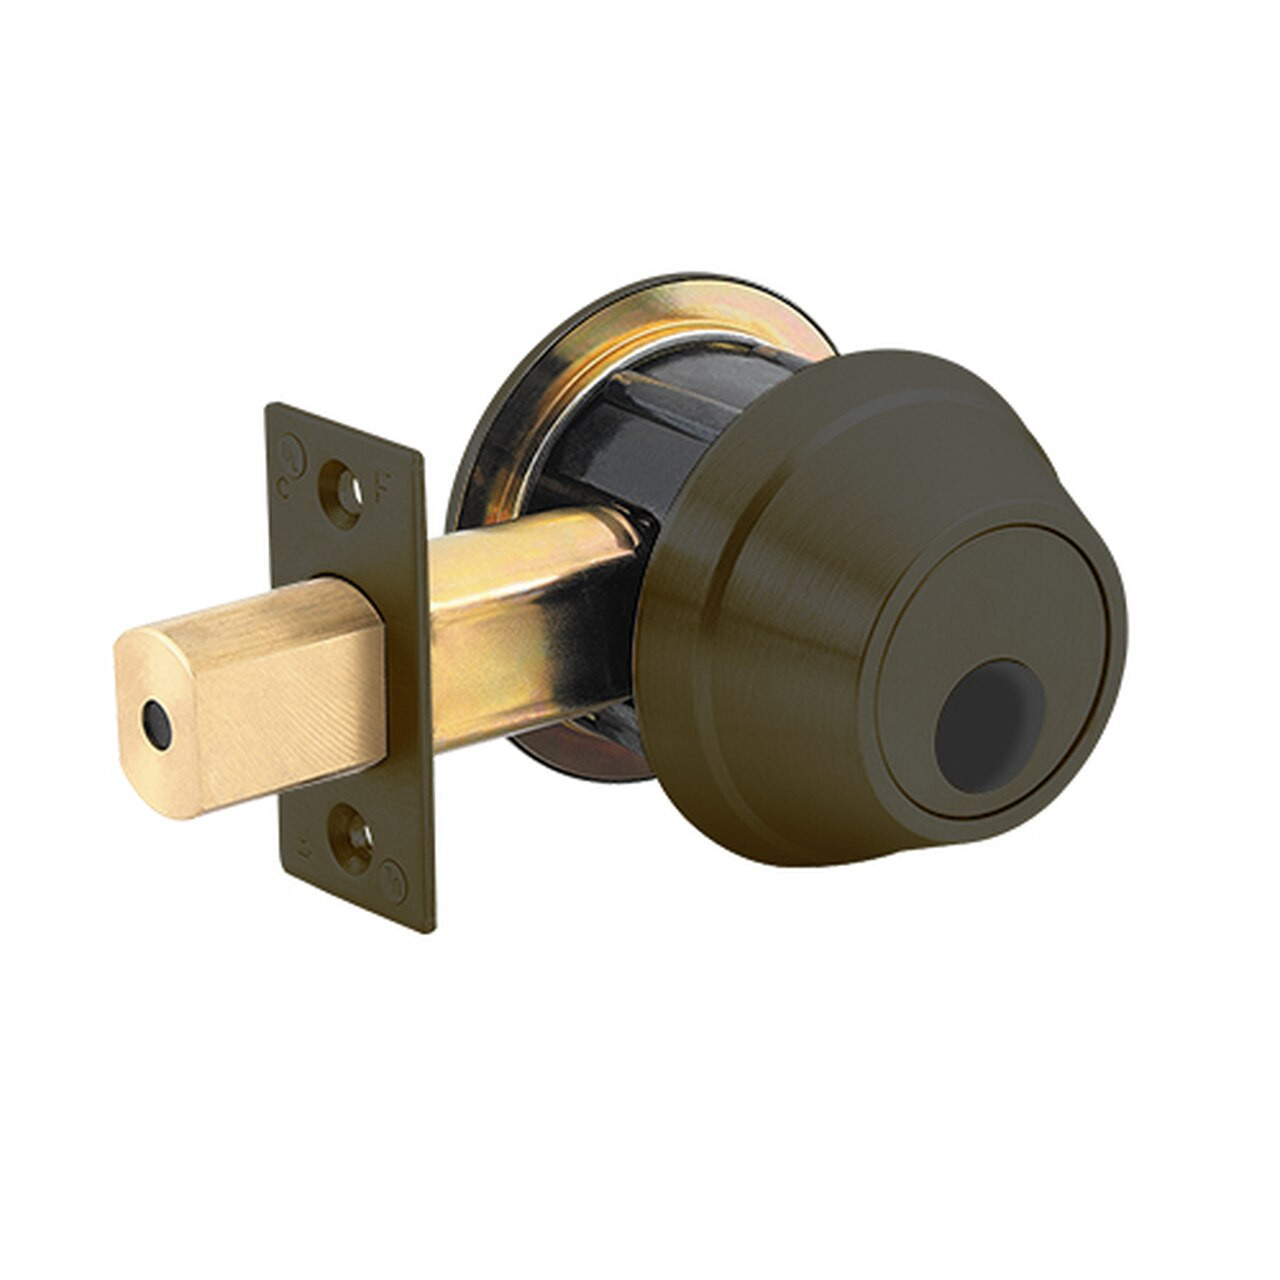 QDB282-613-R4-NOS-SC Stanley QDB200 Series Double Cylinder Standard Duty Auxiliary Deadbolt Lock in Oil Rubbed Bronze Finish